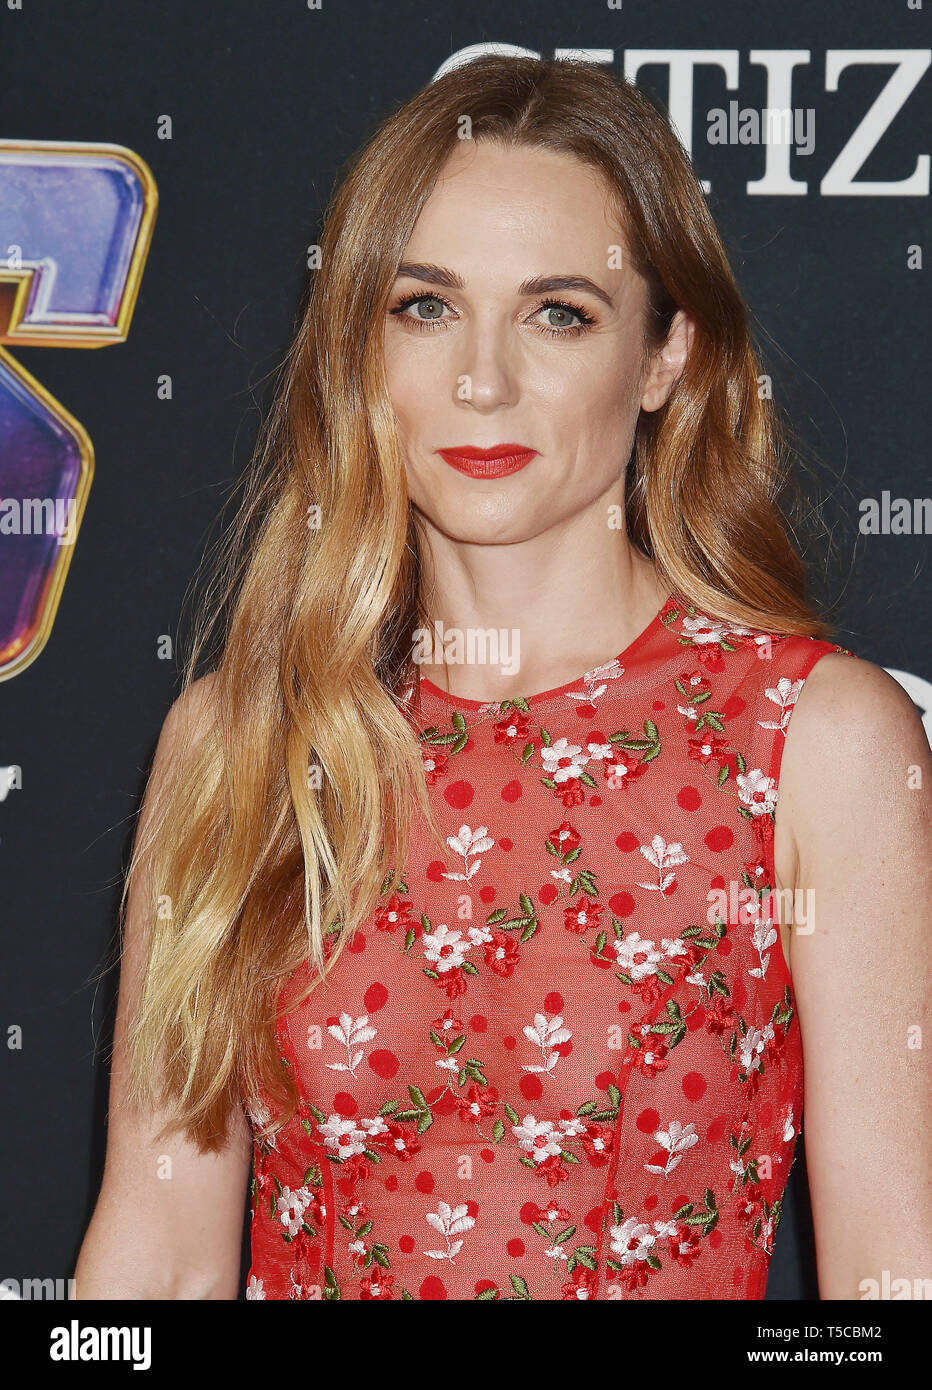 LOS ANGELES, CA - APRIL 22: Kerry Condon arrives at the world premiere Of Walt Disney Studios Motion Pictures 'Avengers: Endgame' at the Los Angeles Convention Center on April 22, 2019 in Los Angeles, California. Stock Photo